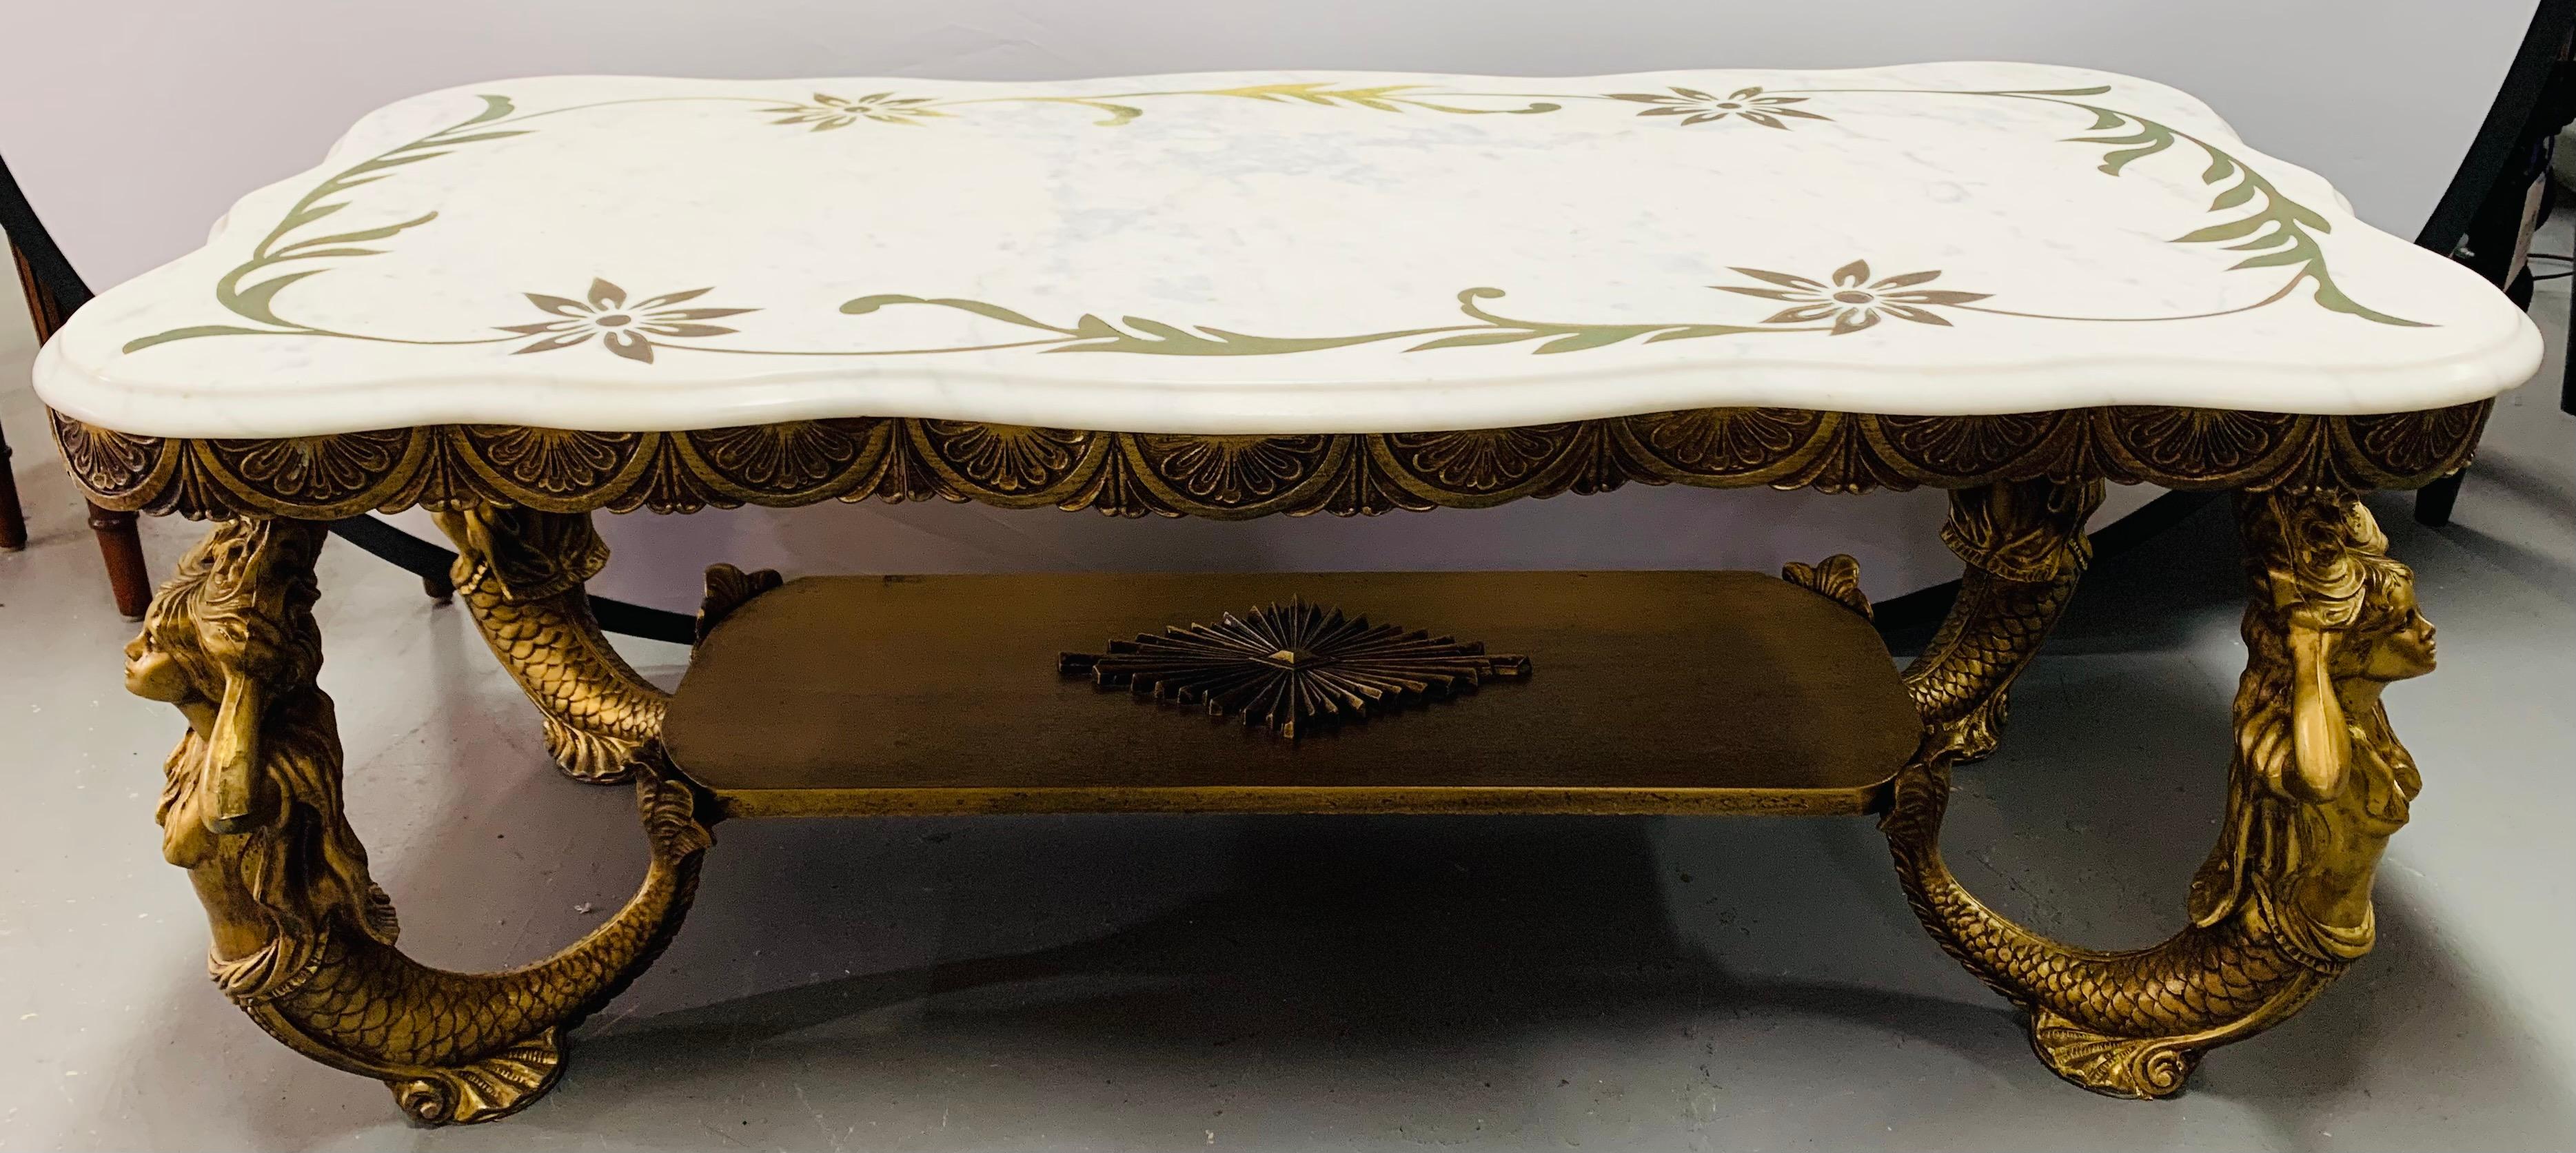 20th Century Midcentury Brass Myth Mermaid Sculptural & Marble Coffee or Cocktail Table